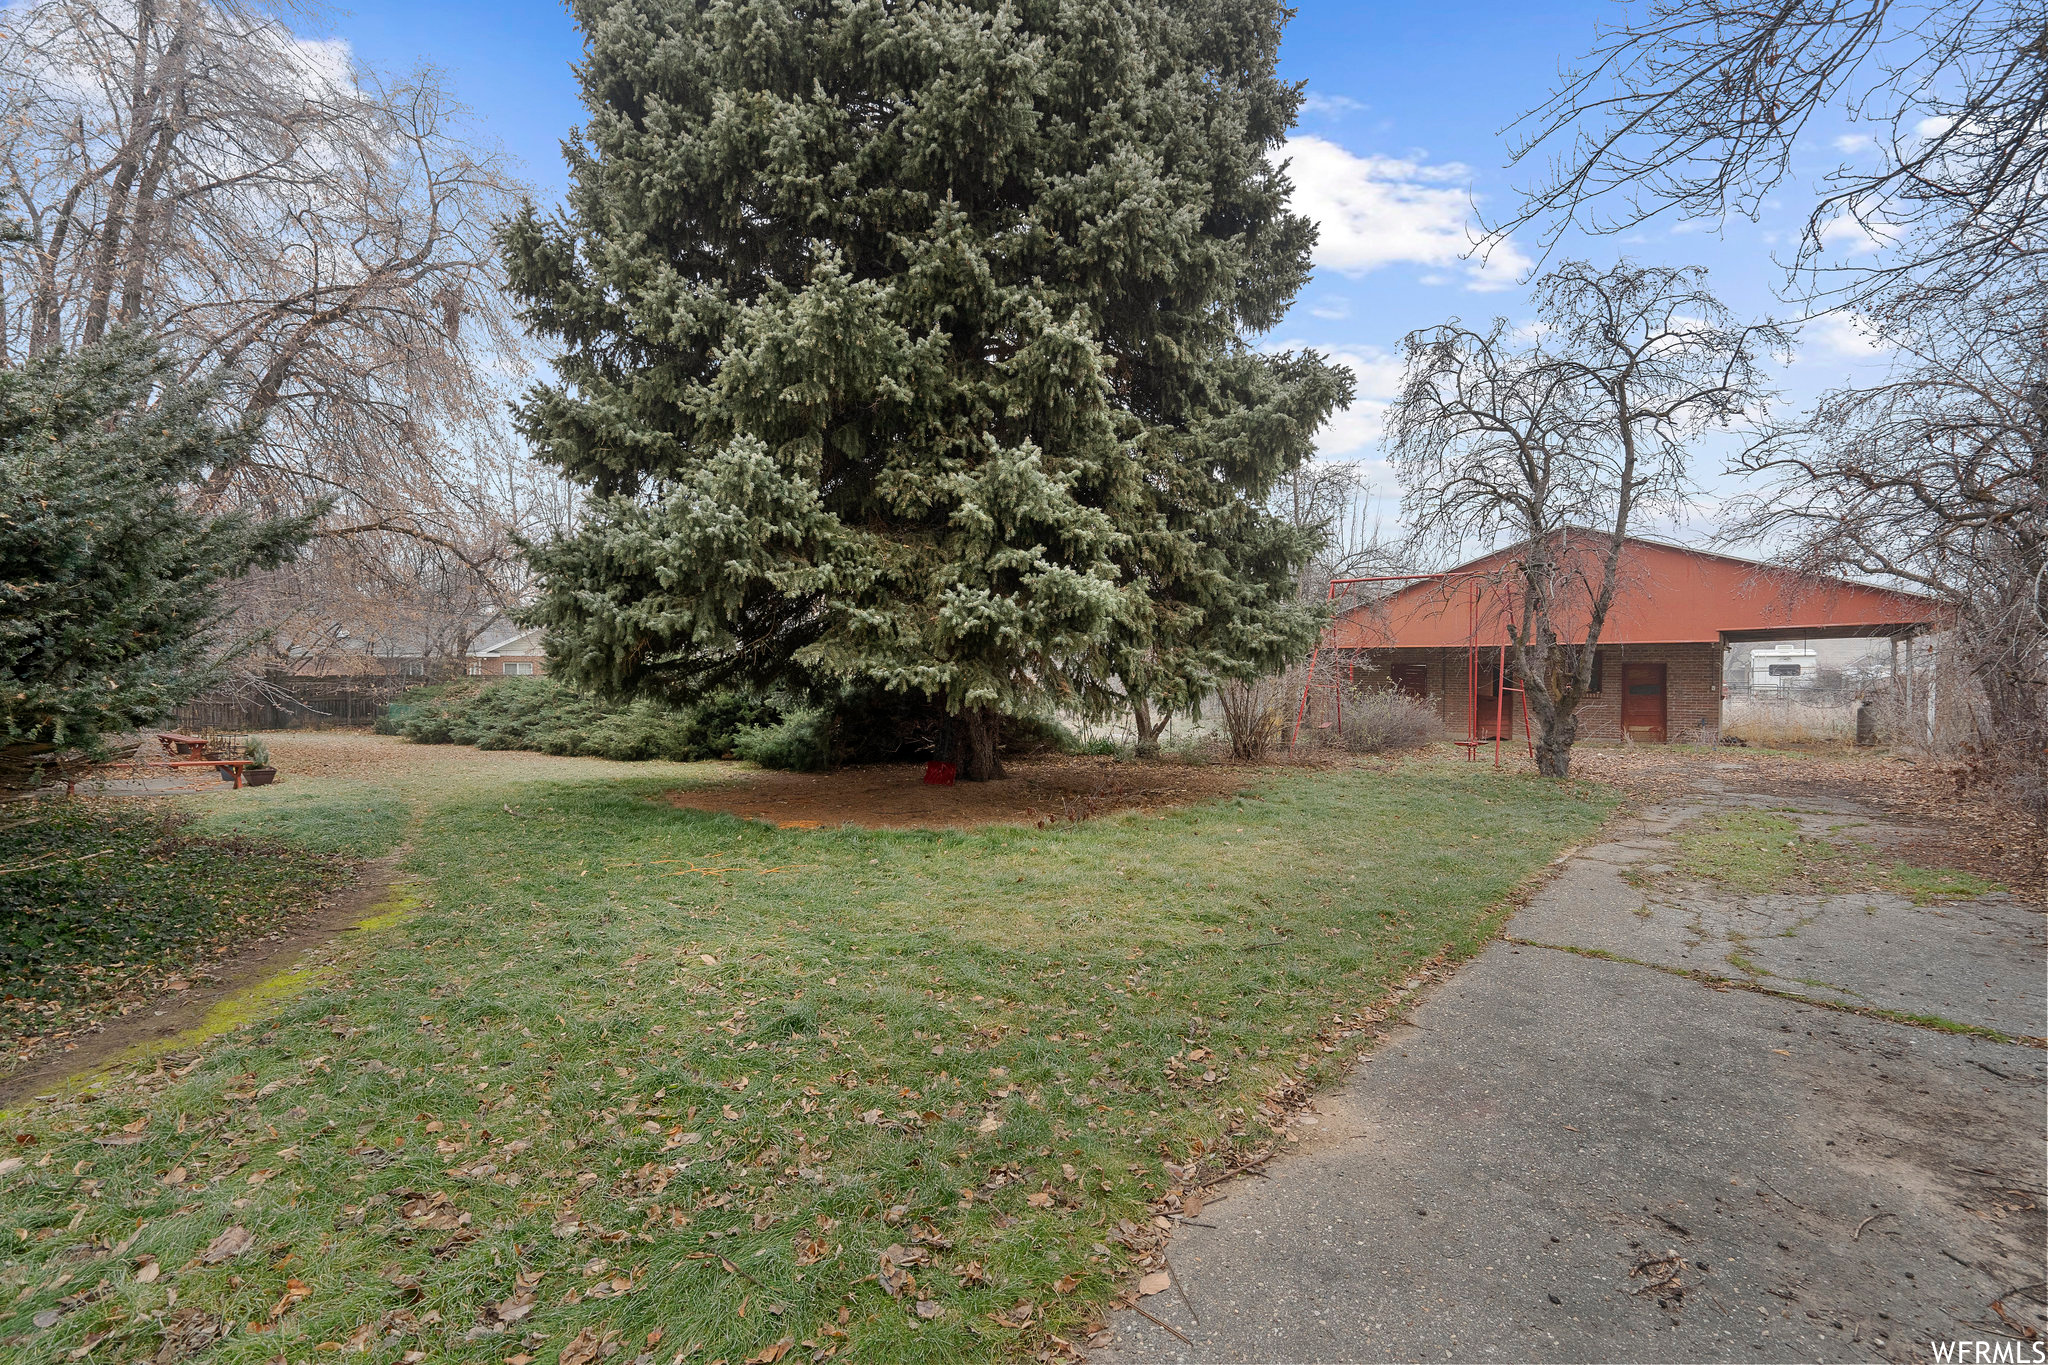 Side DrivewayTOWARDS Stable, Garden, and Horse Pasture